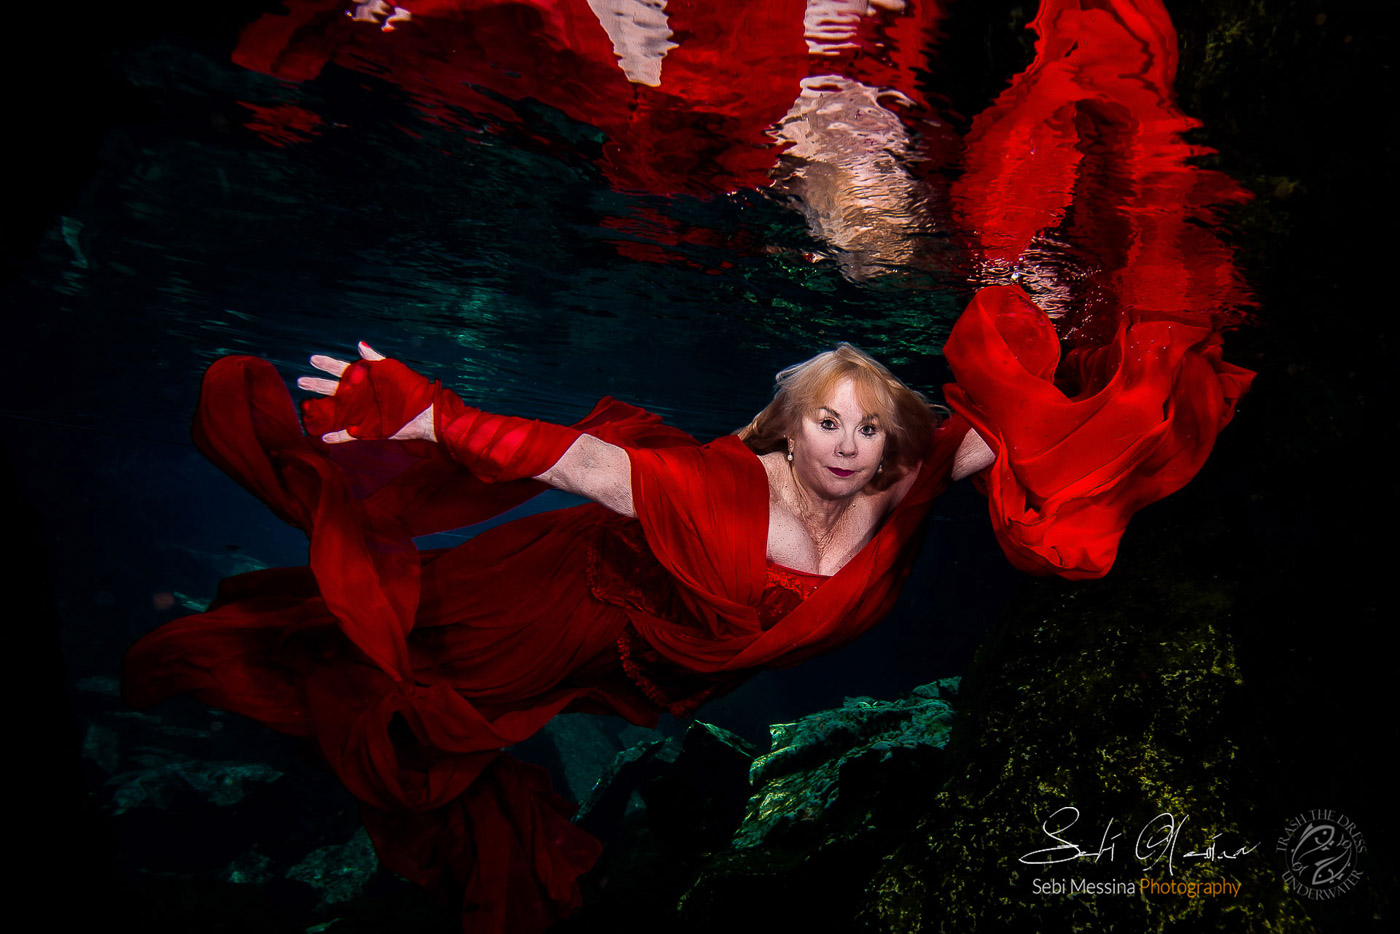 Cenote Tulum Underwater Modeling – Forever Young - Janet – Sebi Messina Photography